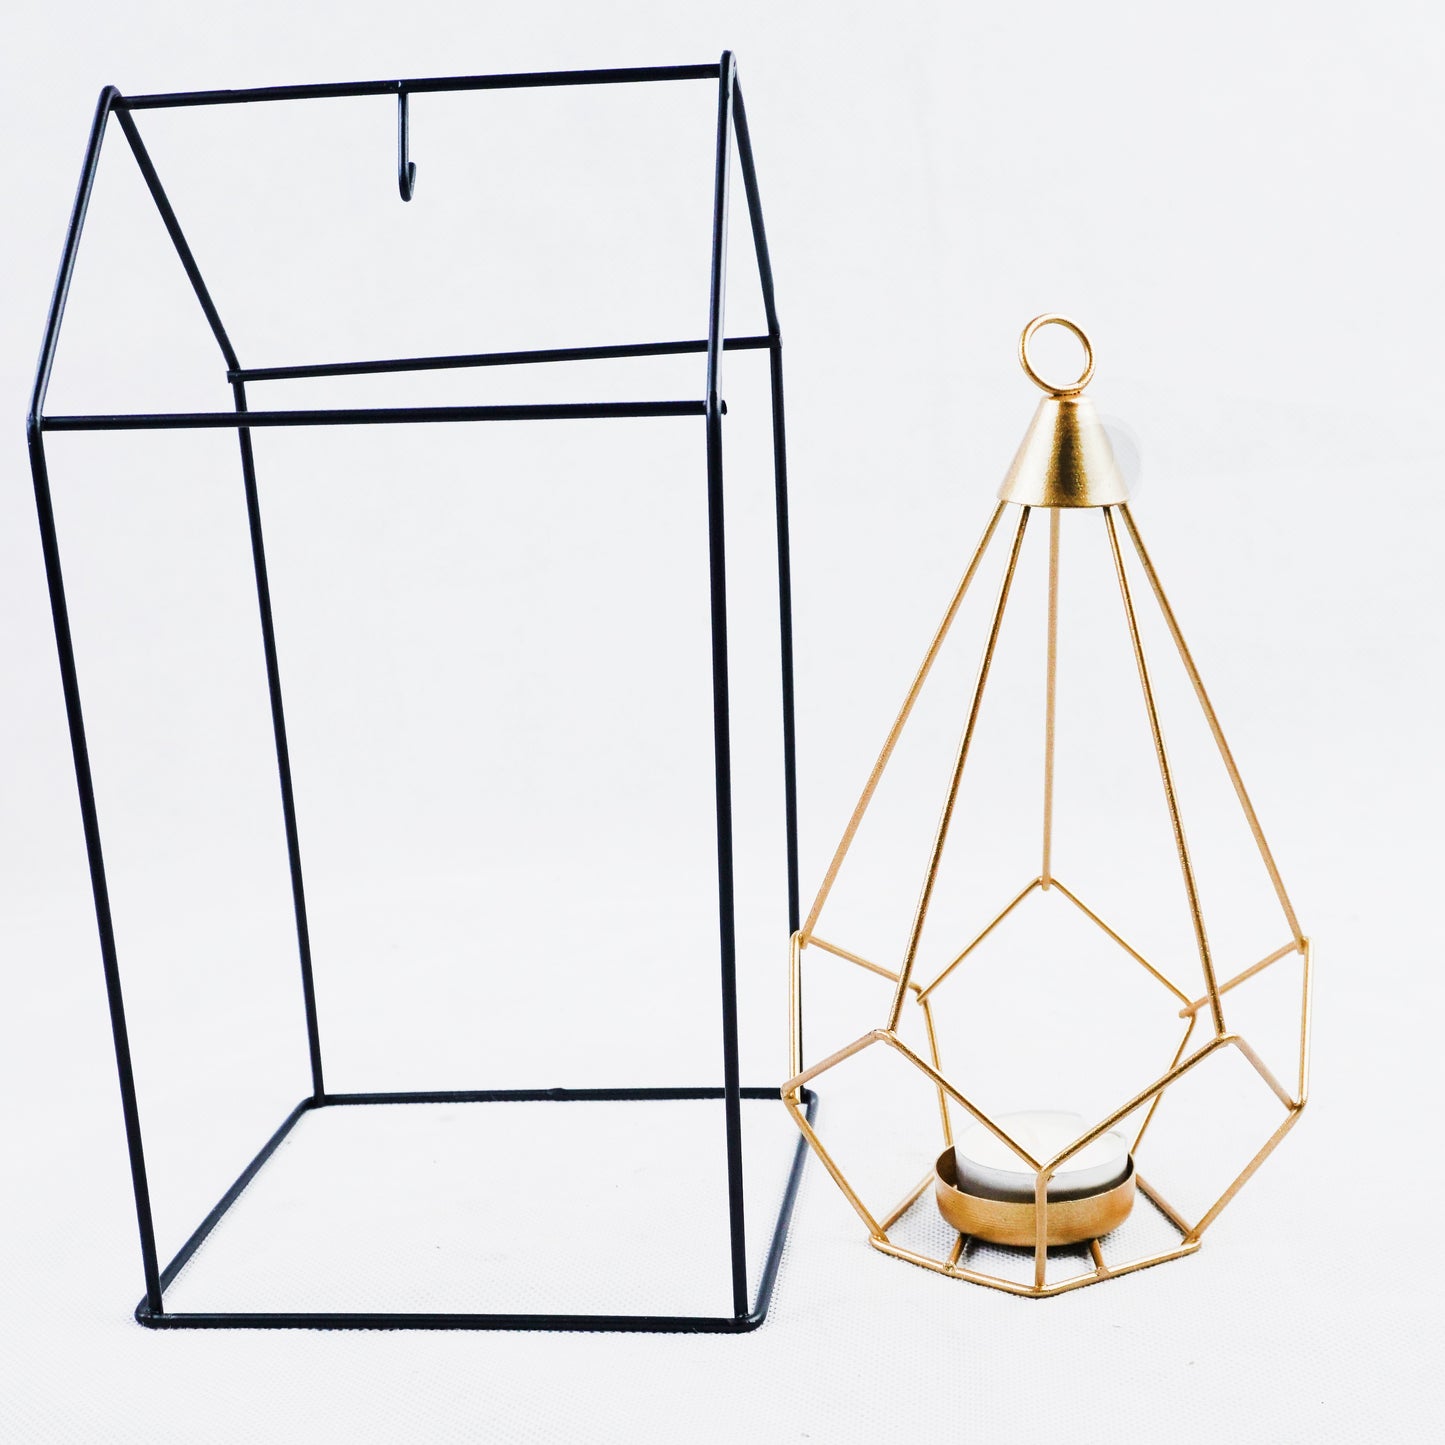 Iron Hut Shape Stand With Hanging Drop Tealight Candle Holder Centrepiece Decor